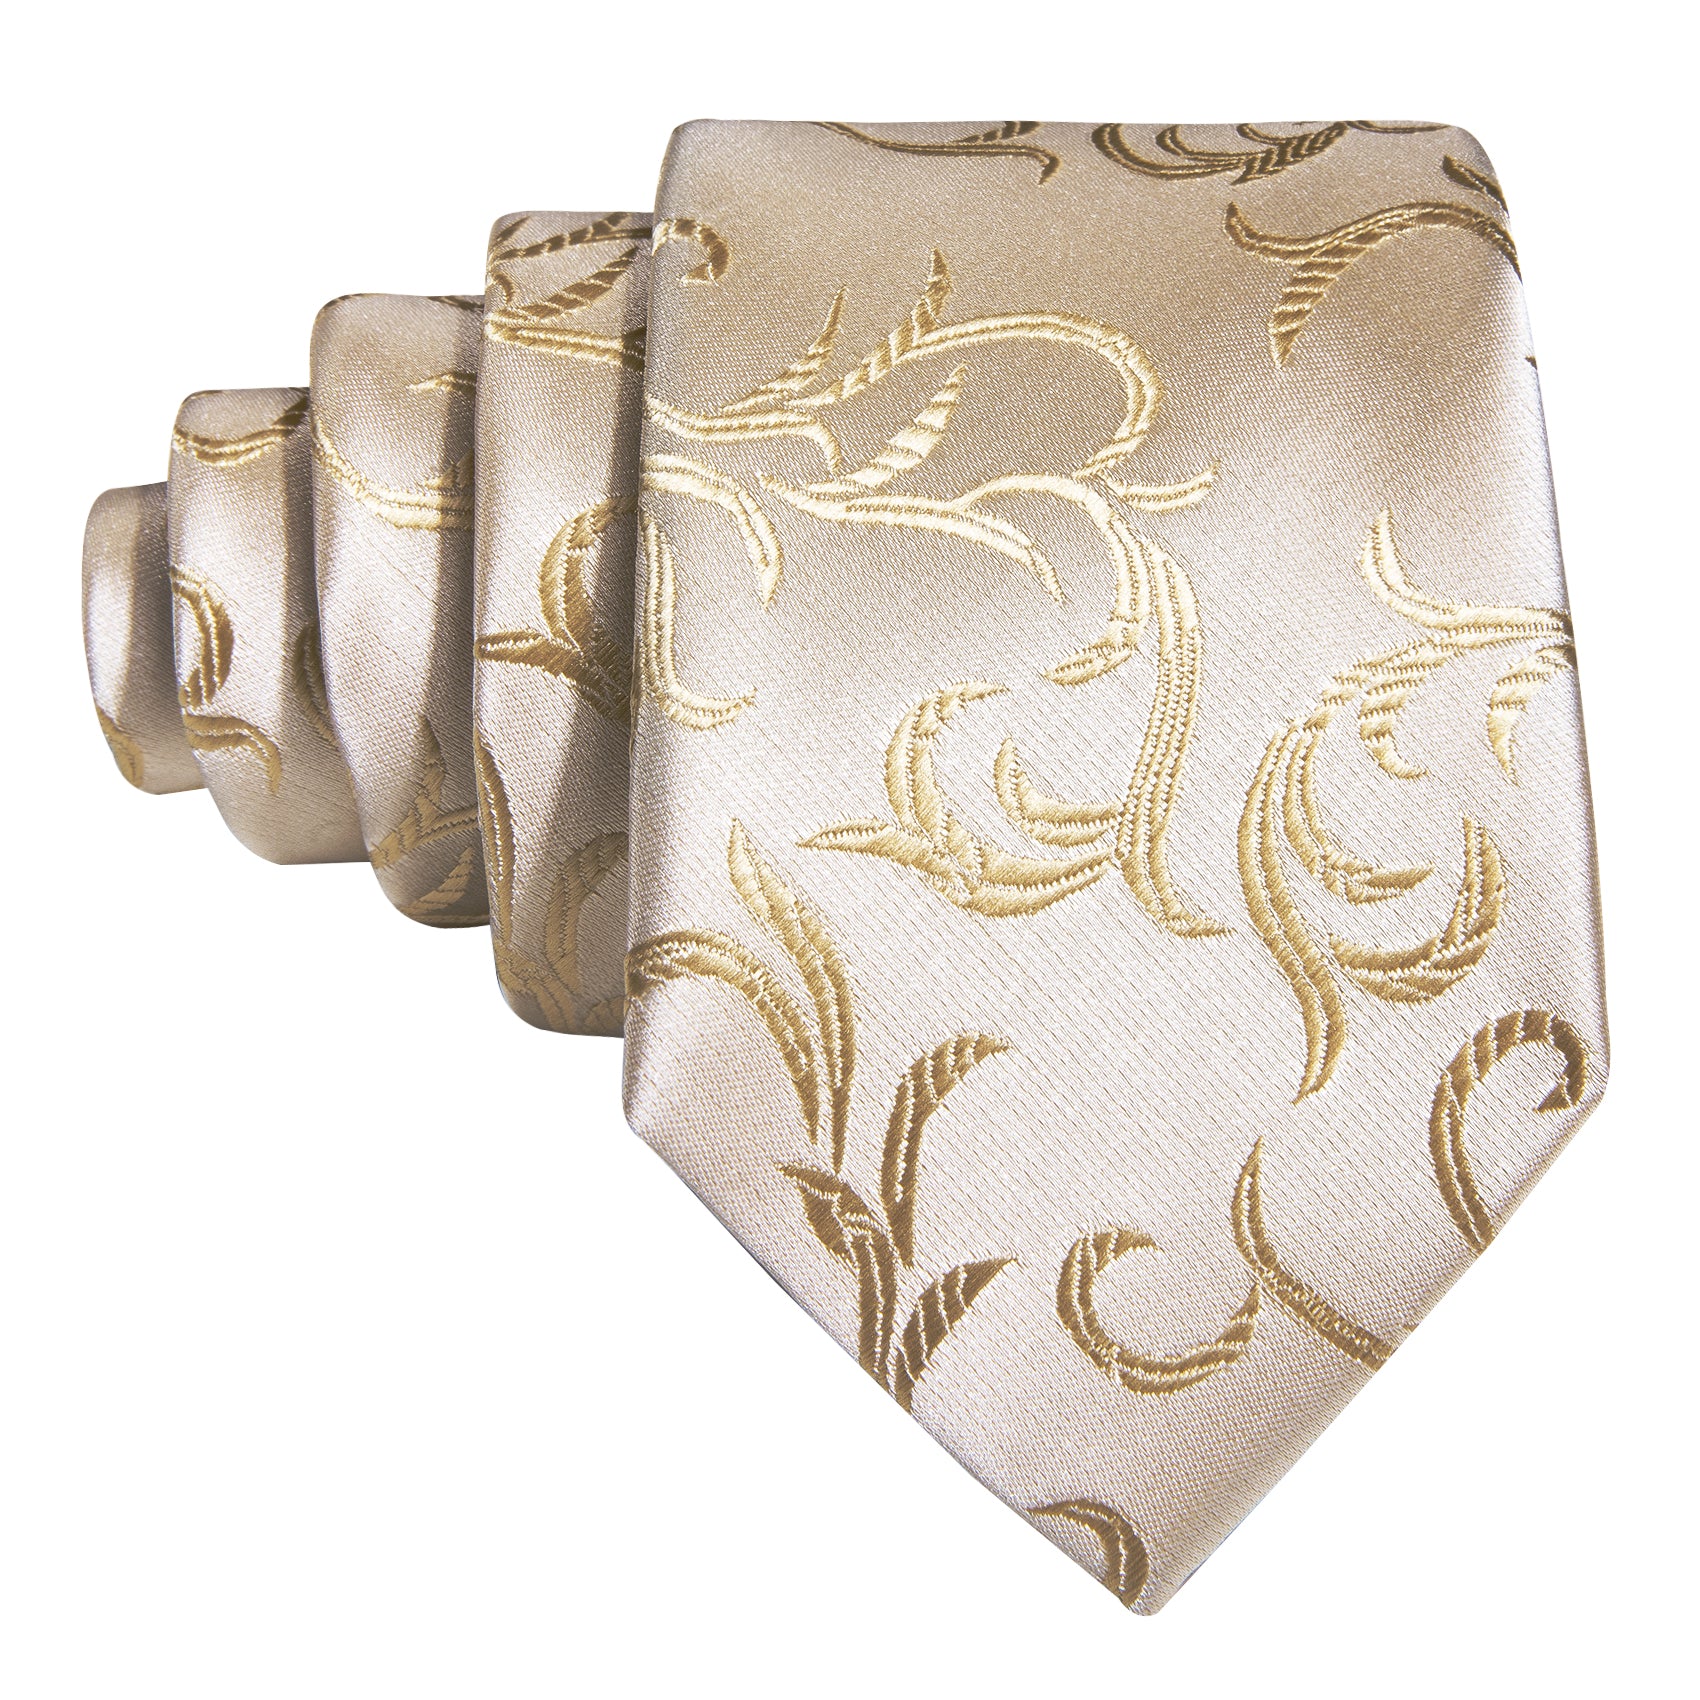 Barry.wang Floral Tie Champagne White Children's Tie Pocket Square Set